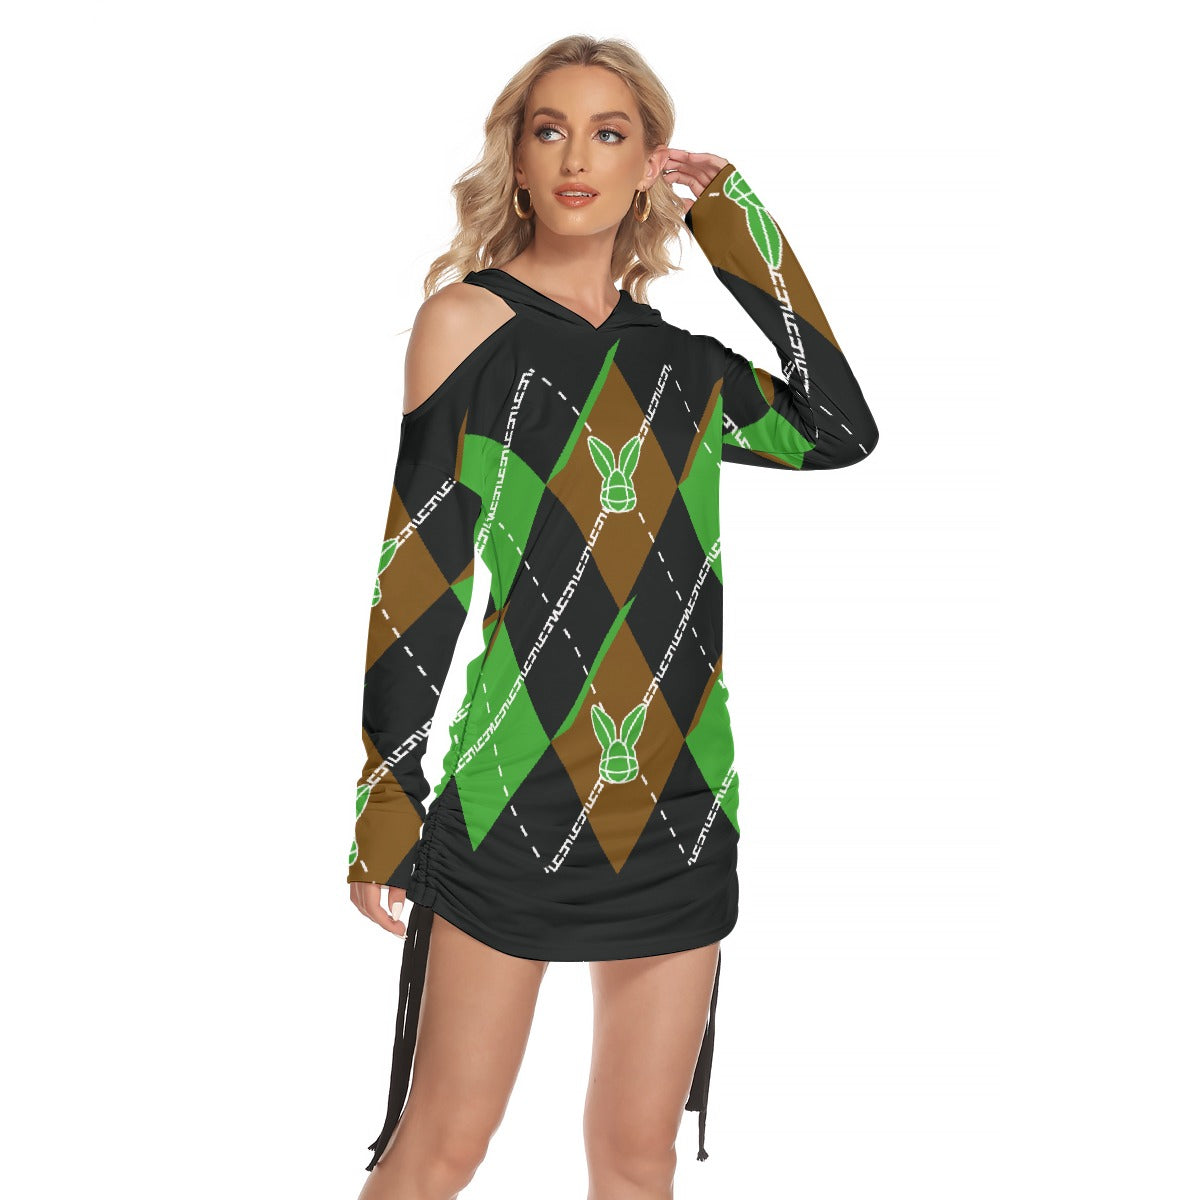 Stand out  with the  Women's One-shoulder Argyle Dress  available at Hey Nugget. Grab yours today!